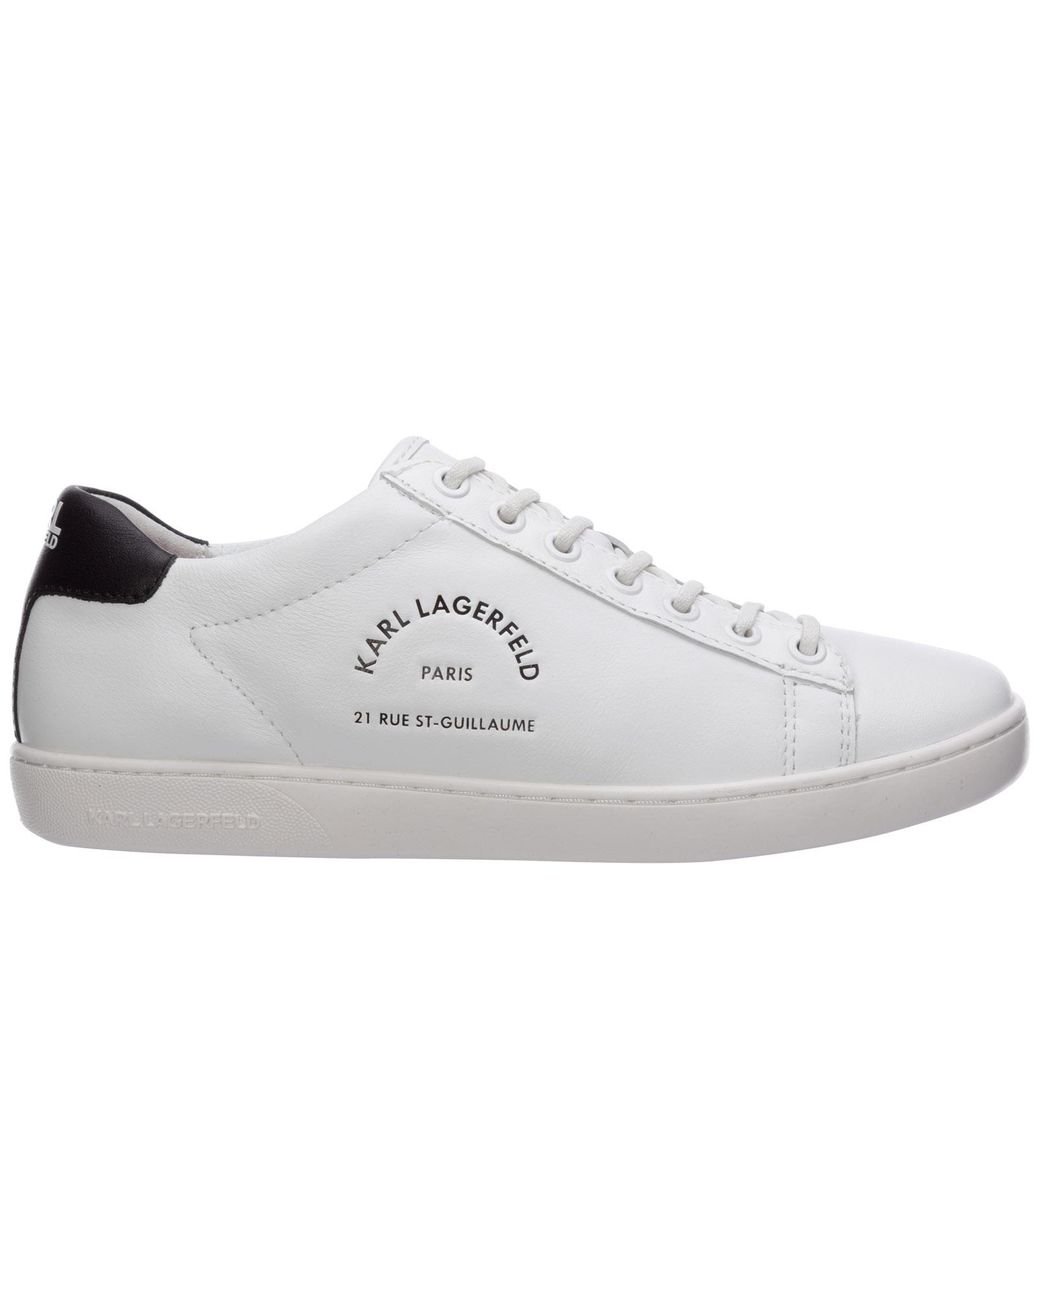 Karl Lagerfeld Women's Shoes Leather Trainers Sneakers in White - Lyst